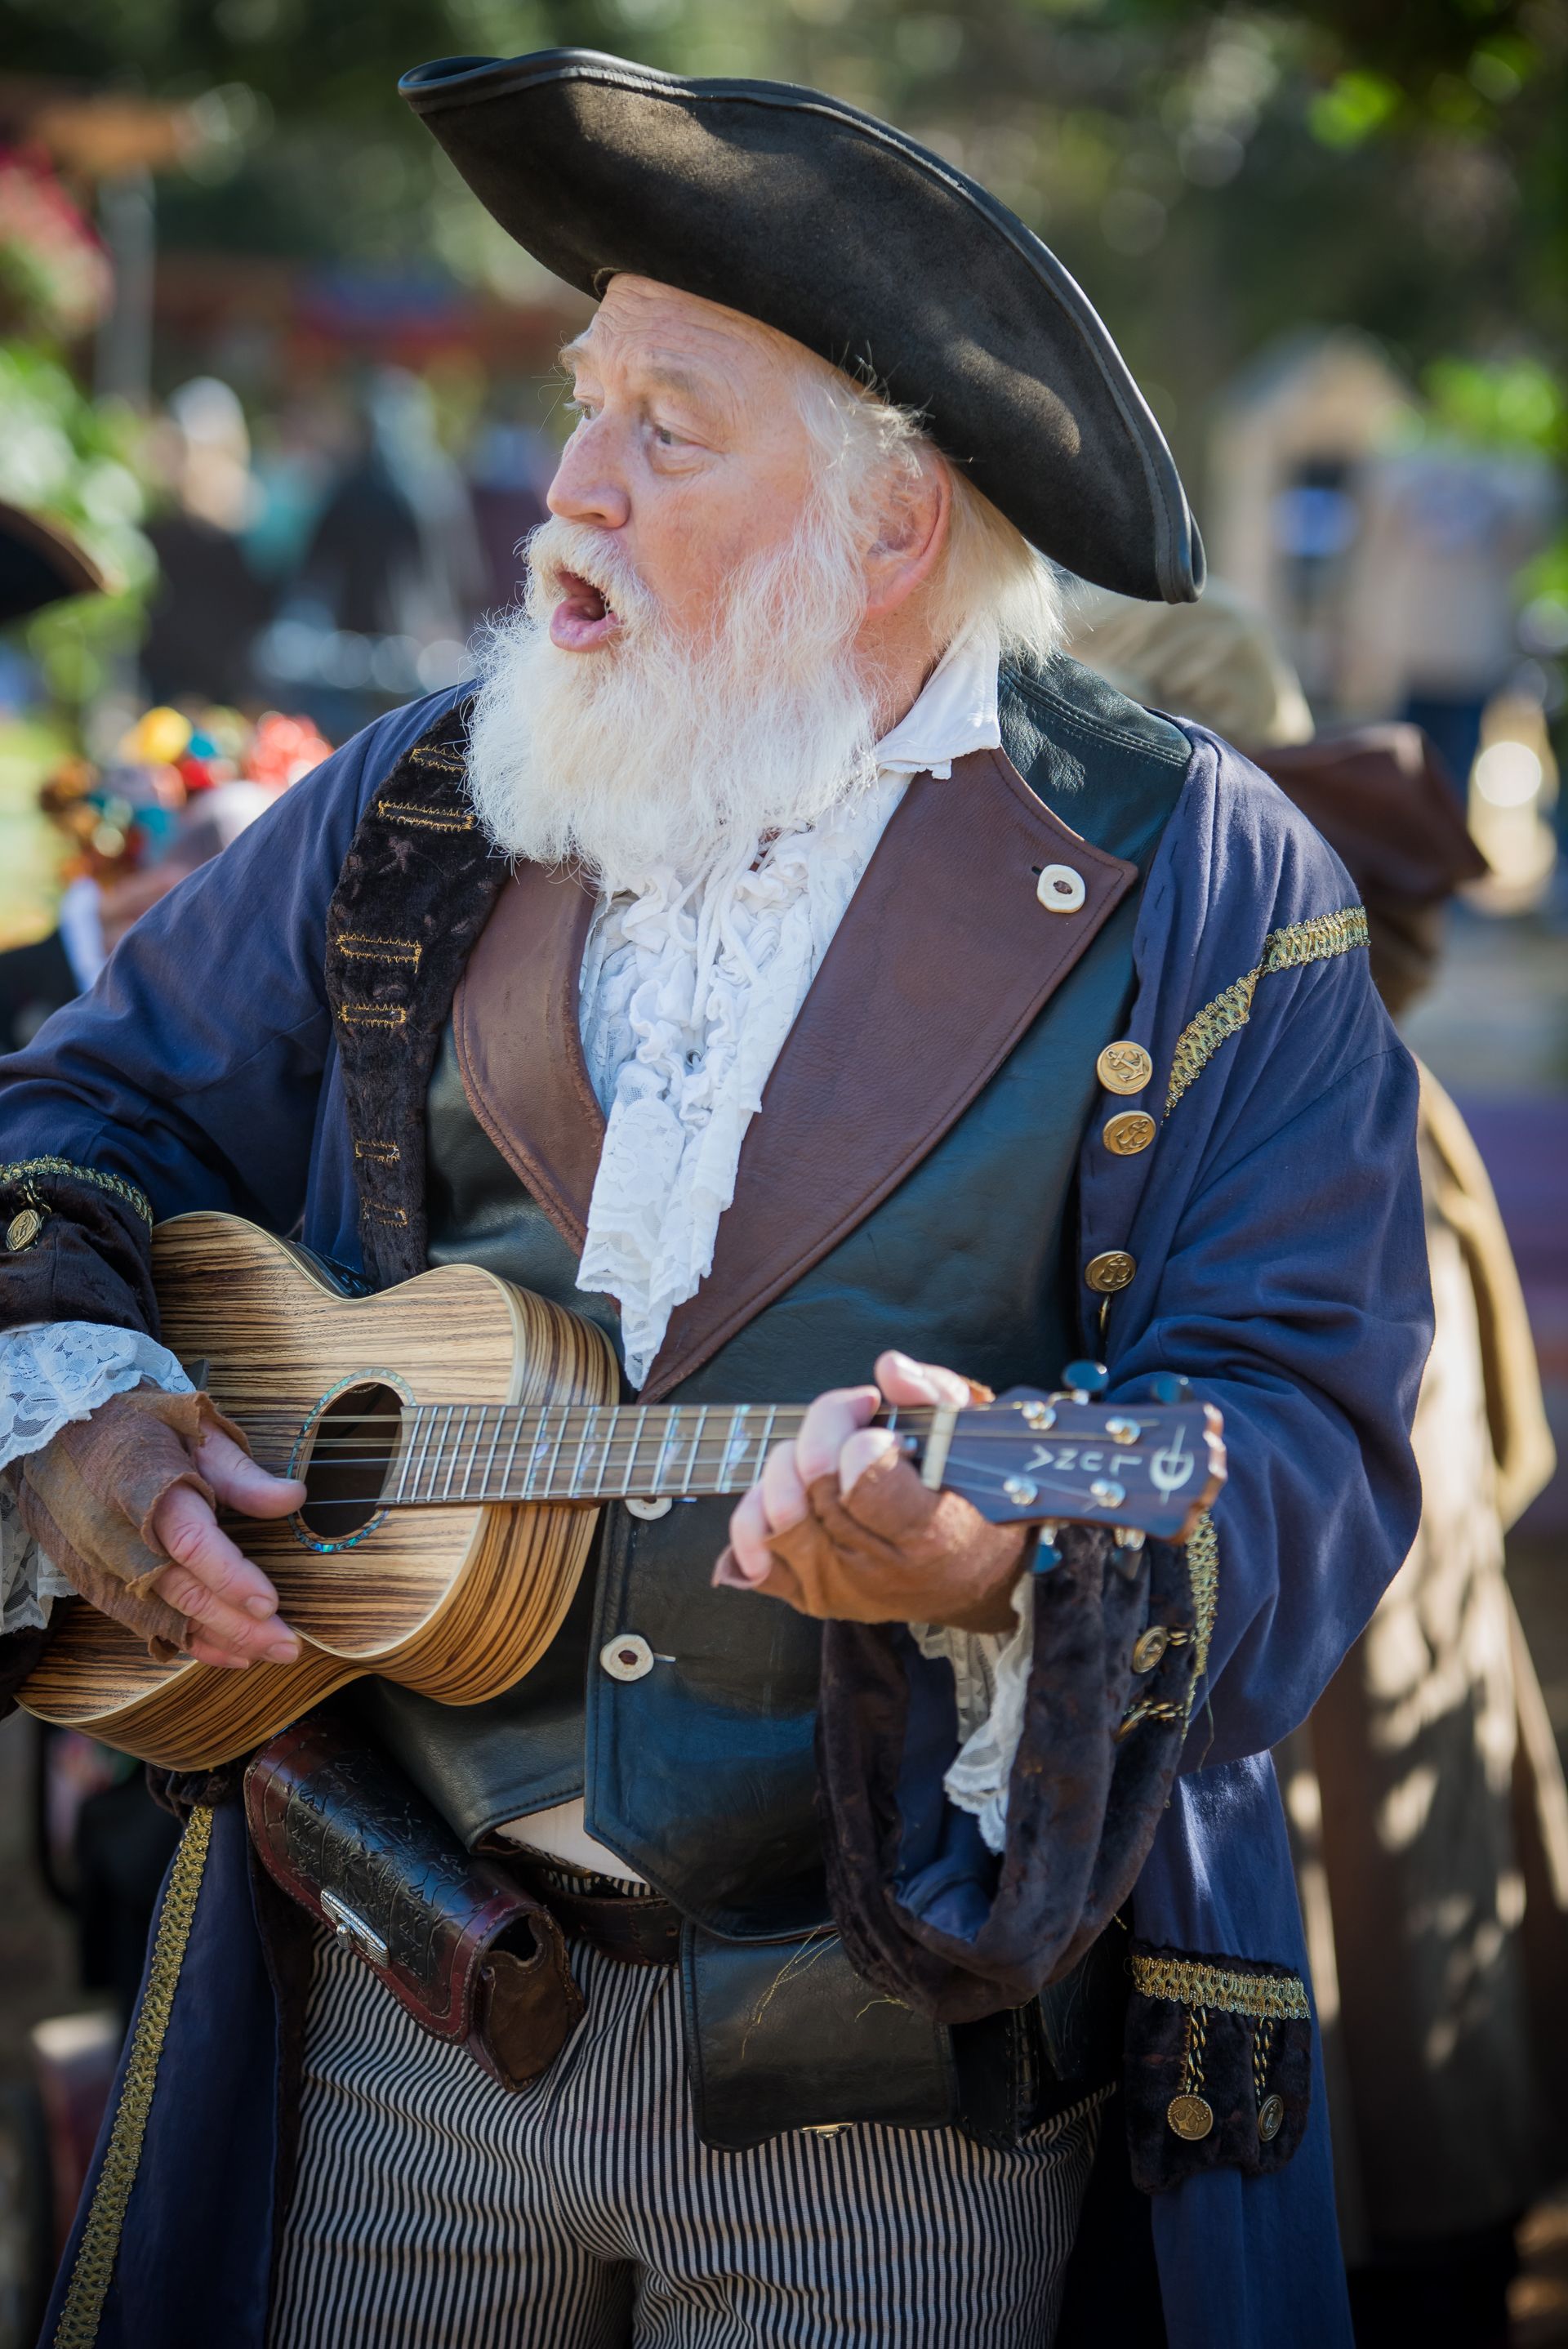 We discovered this patron entertaining fellow faire goers with a song and a really beautiful guitar.